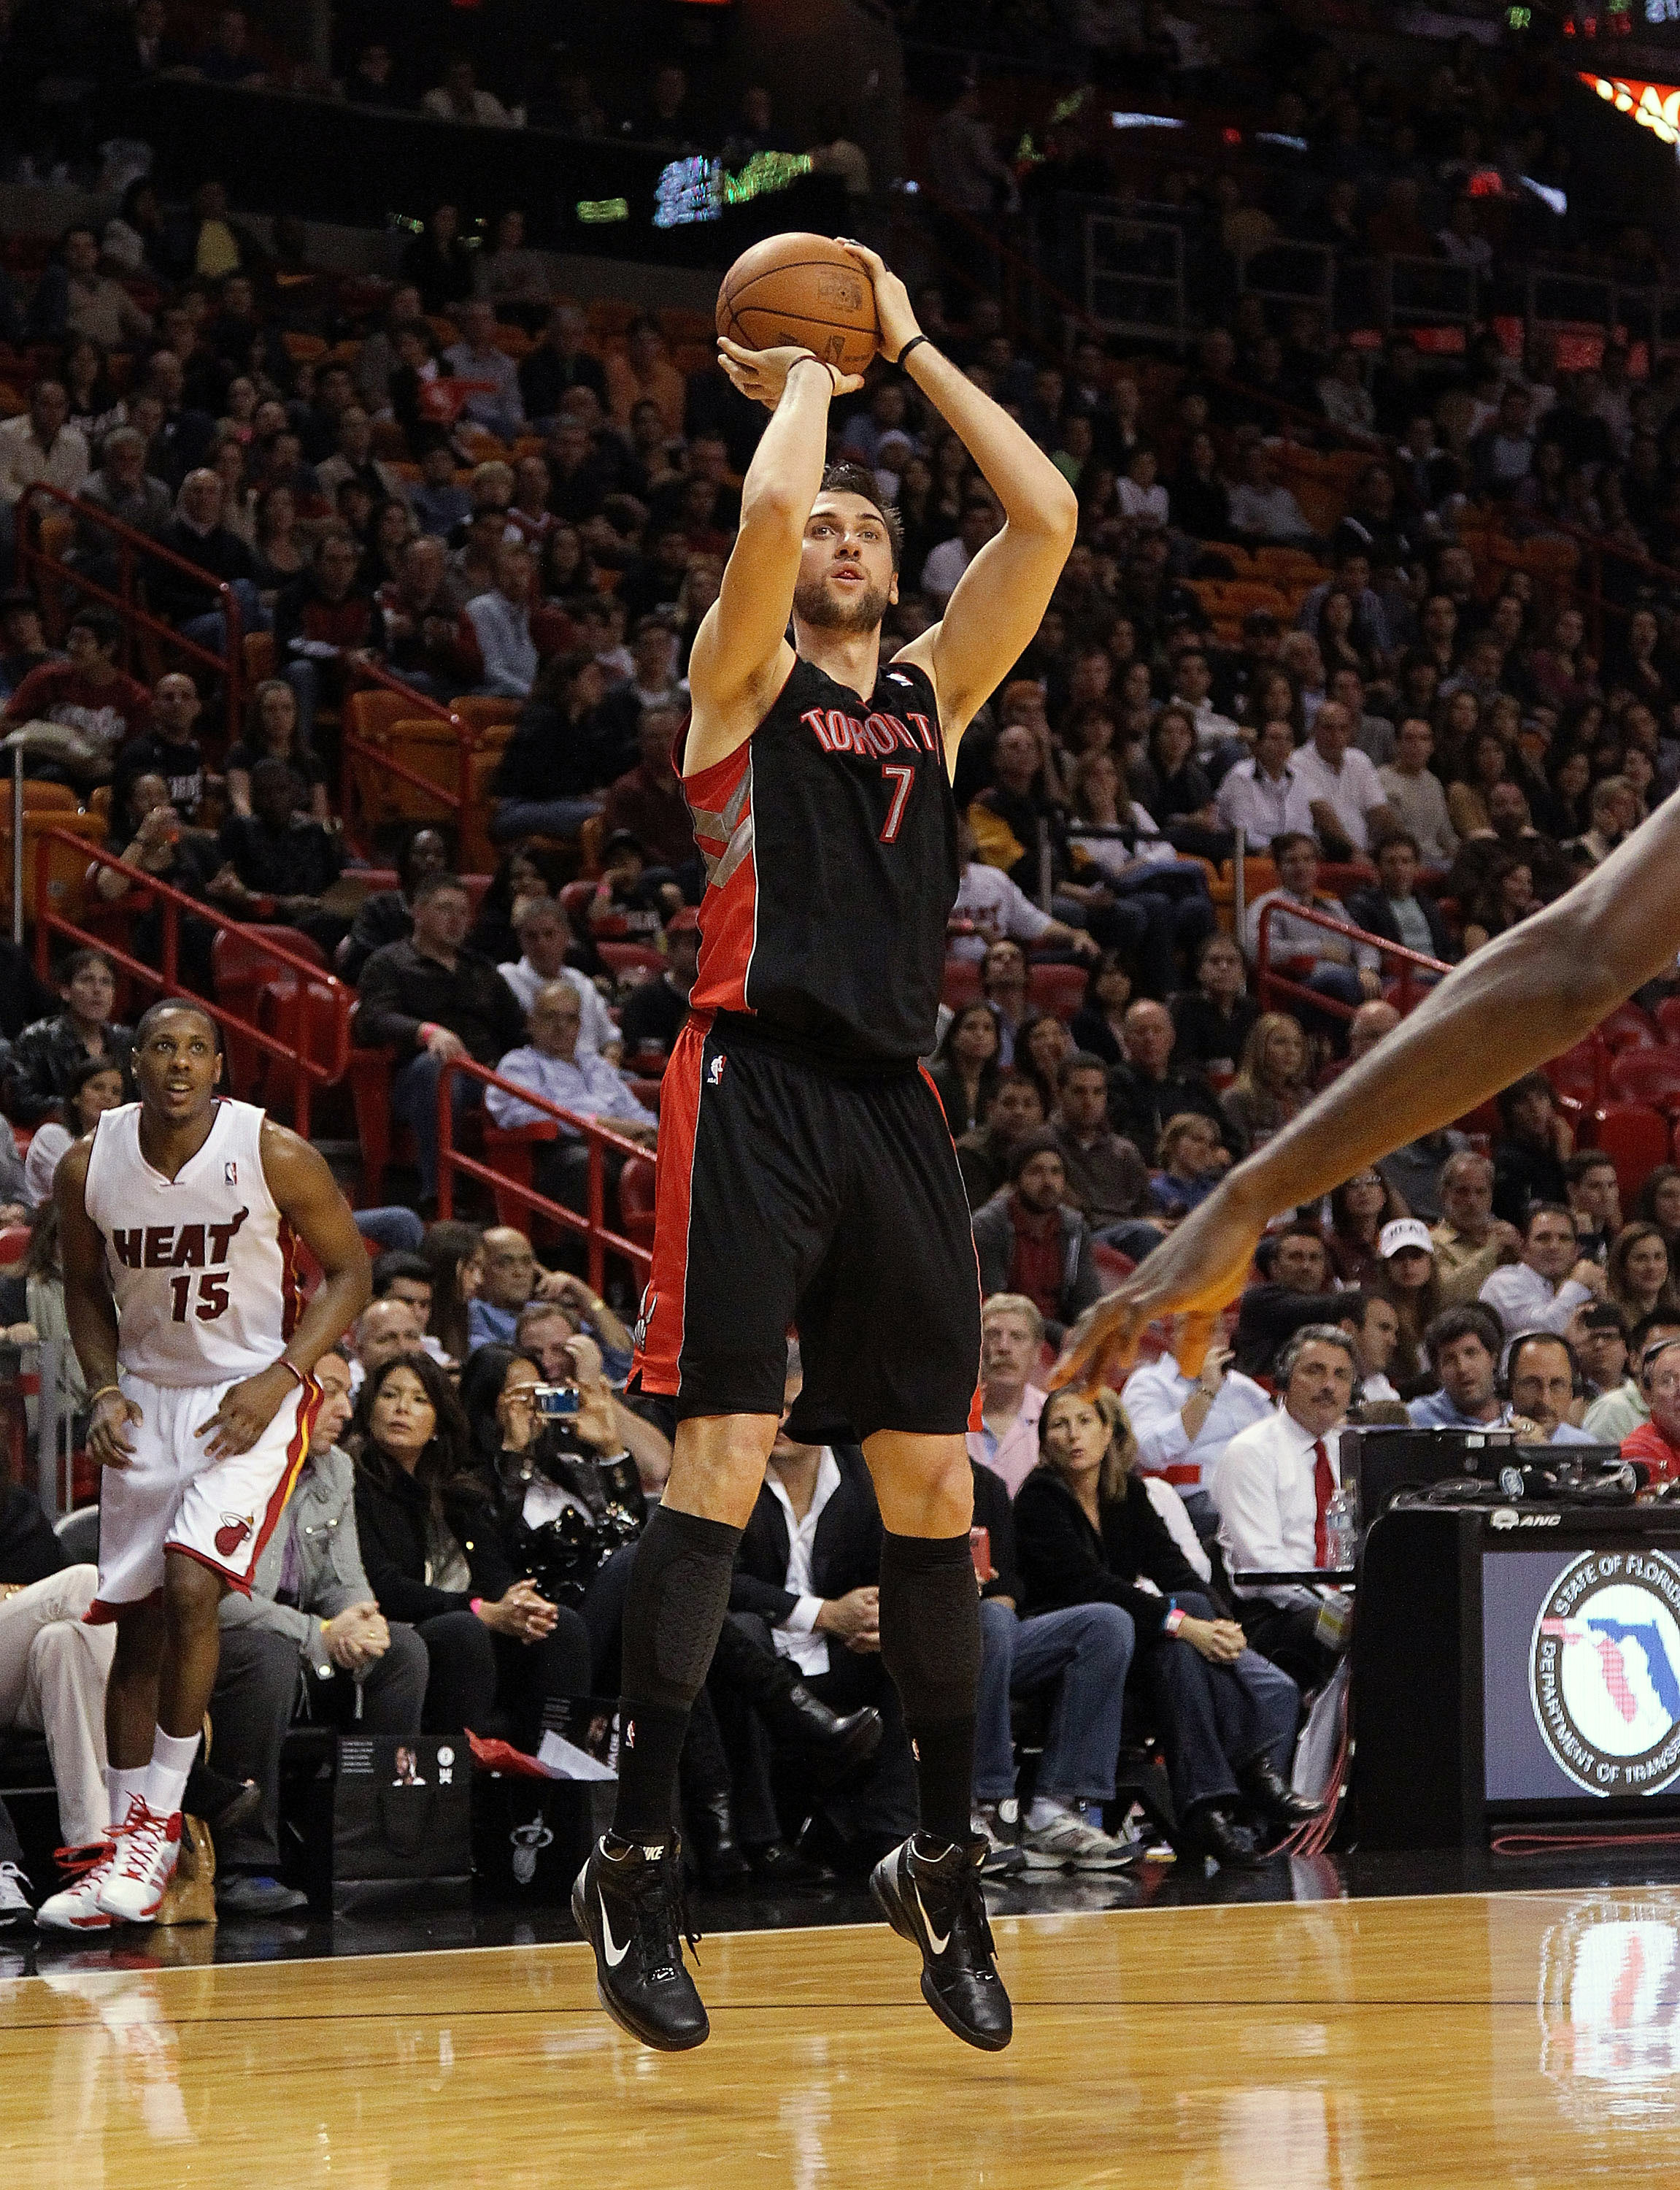 MIAMI, FL - JANUARY 22: Andrea Bargnani #7 of the Toronto Raptors shoots a jump shot during a game against the Miami Heat at American Airlines Arena on January 22, 2011 in Miami, Florida. NOTE TO USER: User expressly acknowledges and agrees that, by downl